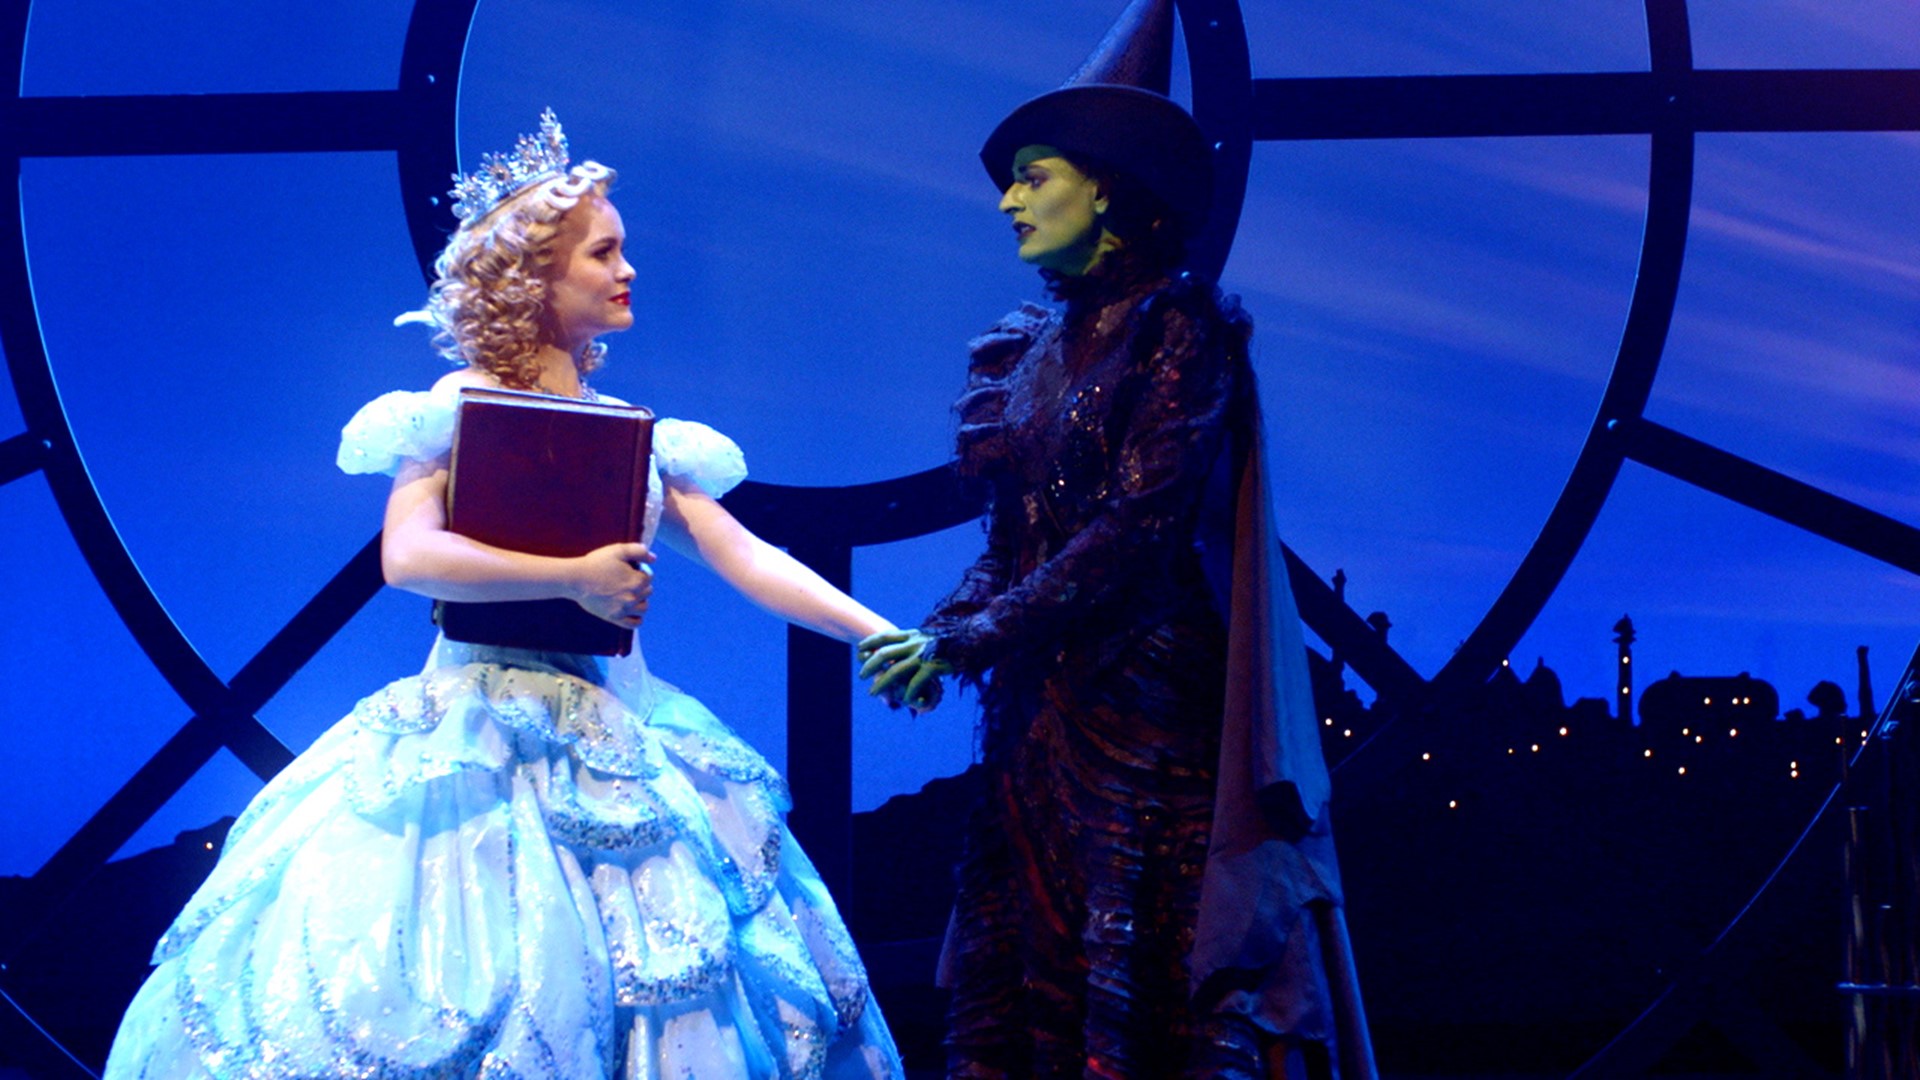 Celia Hottenstein, who is on the WICKED tour as Glinda the Good Witch, speaks to KENS 5 about taking on such an iconic role and what she plans to do in San Antonio.